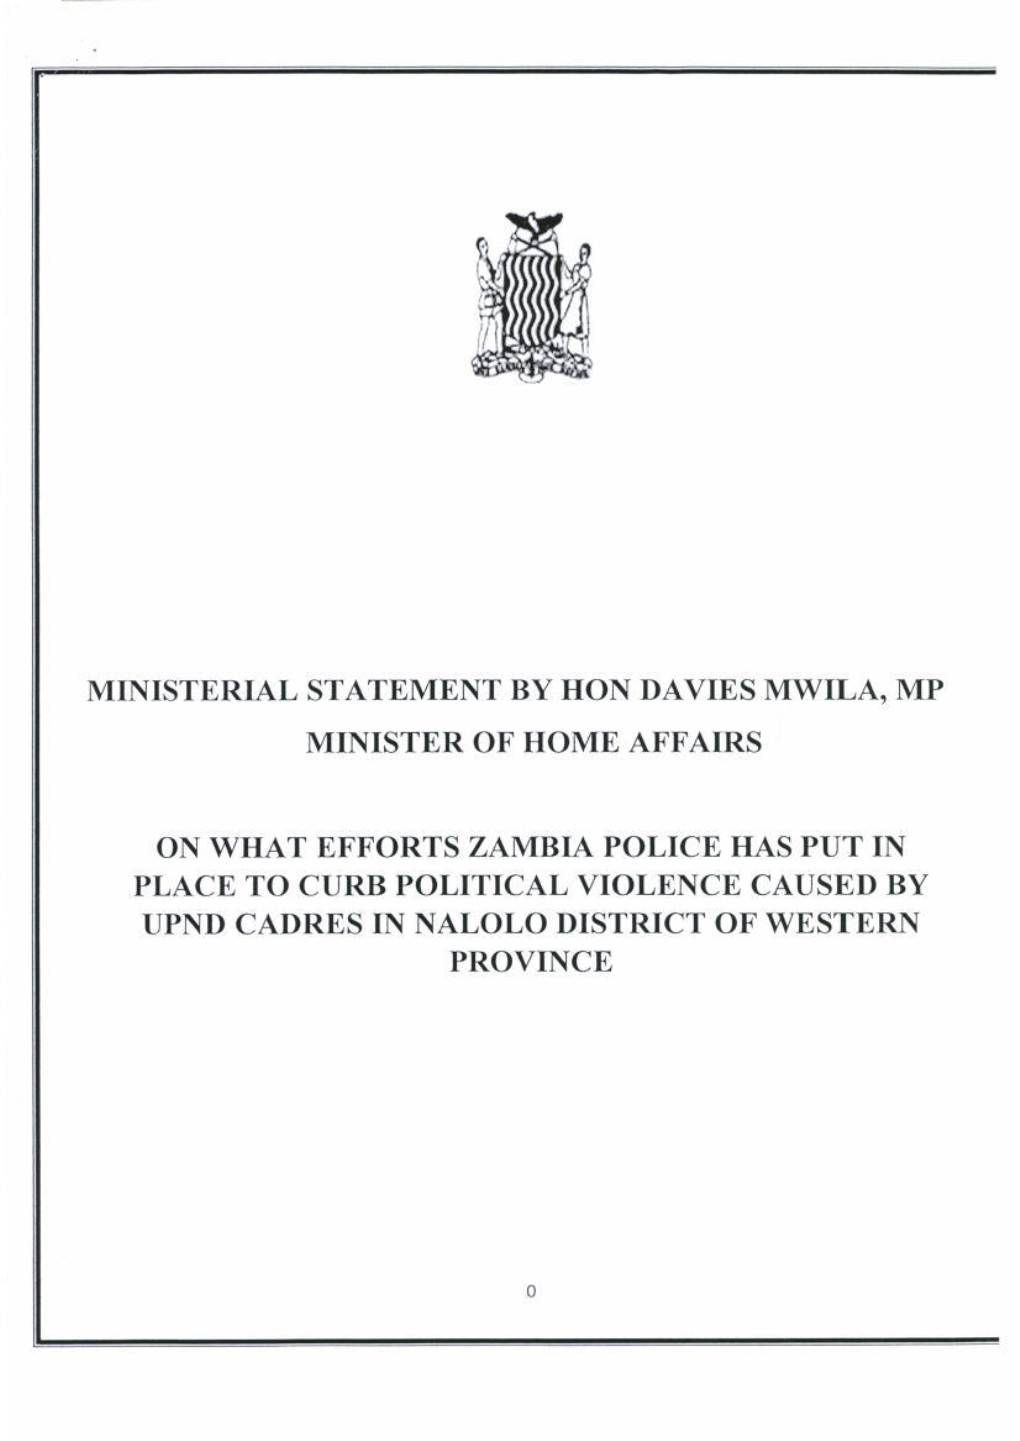 Ministerial Statement by Iion Davies Mwila, Mp Minister of Home Affairs